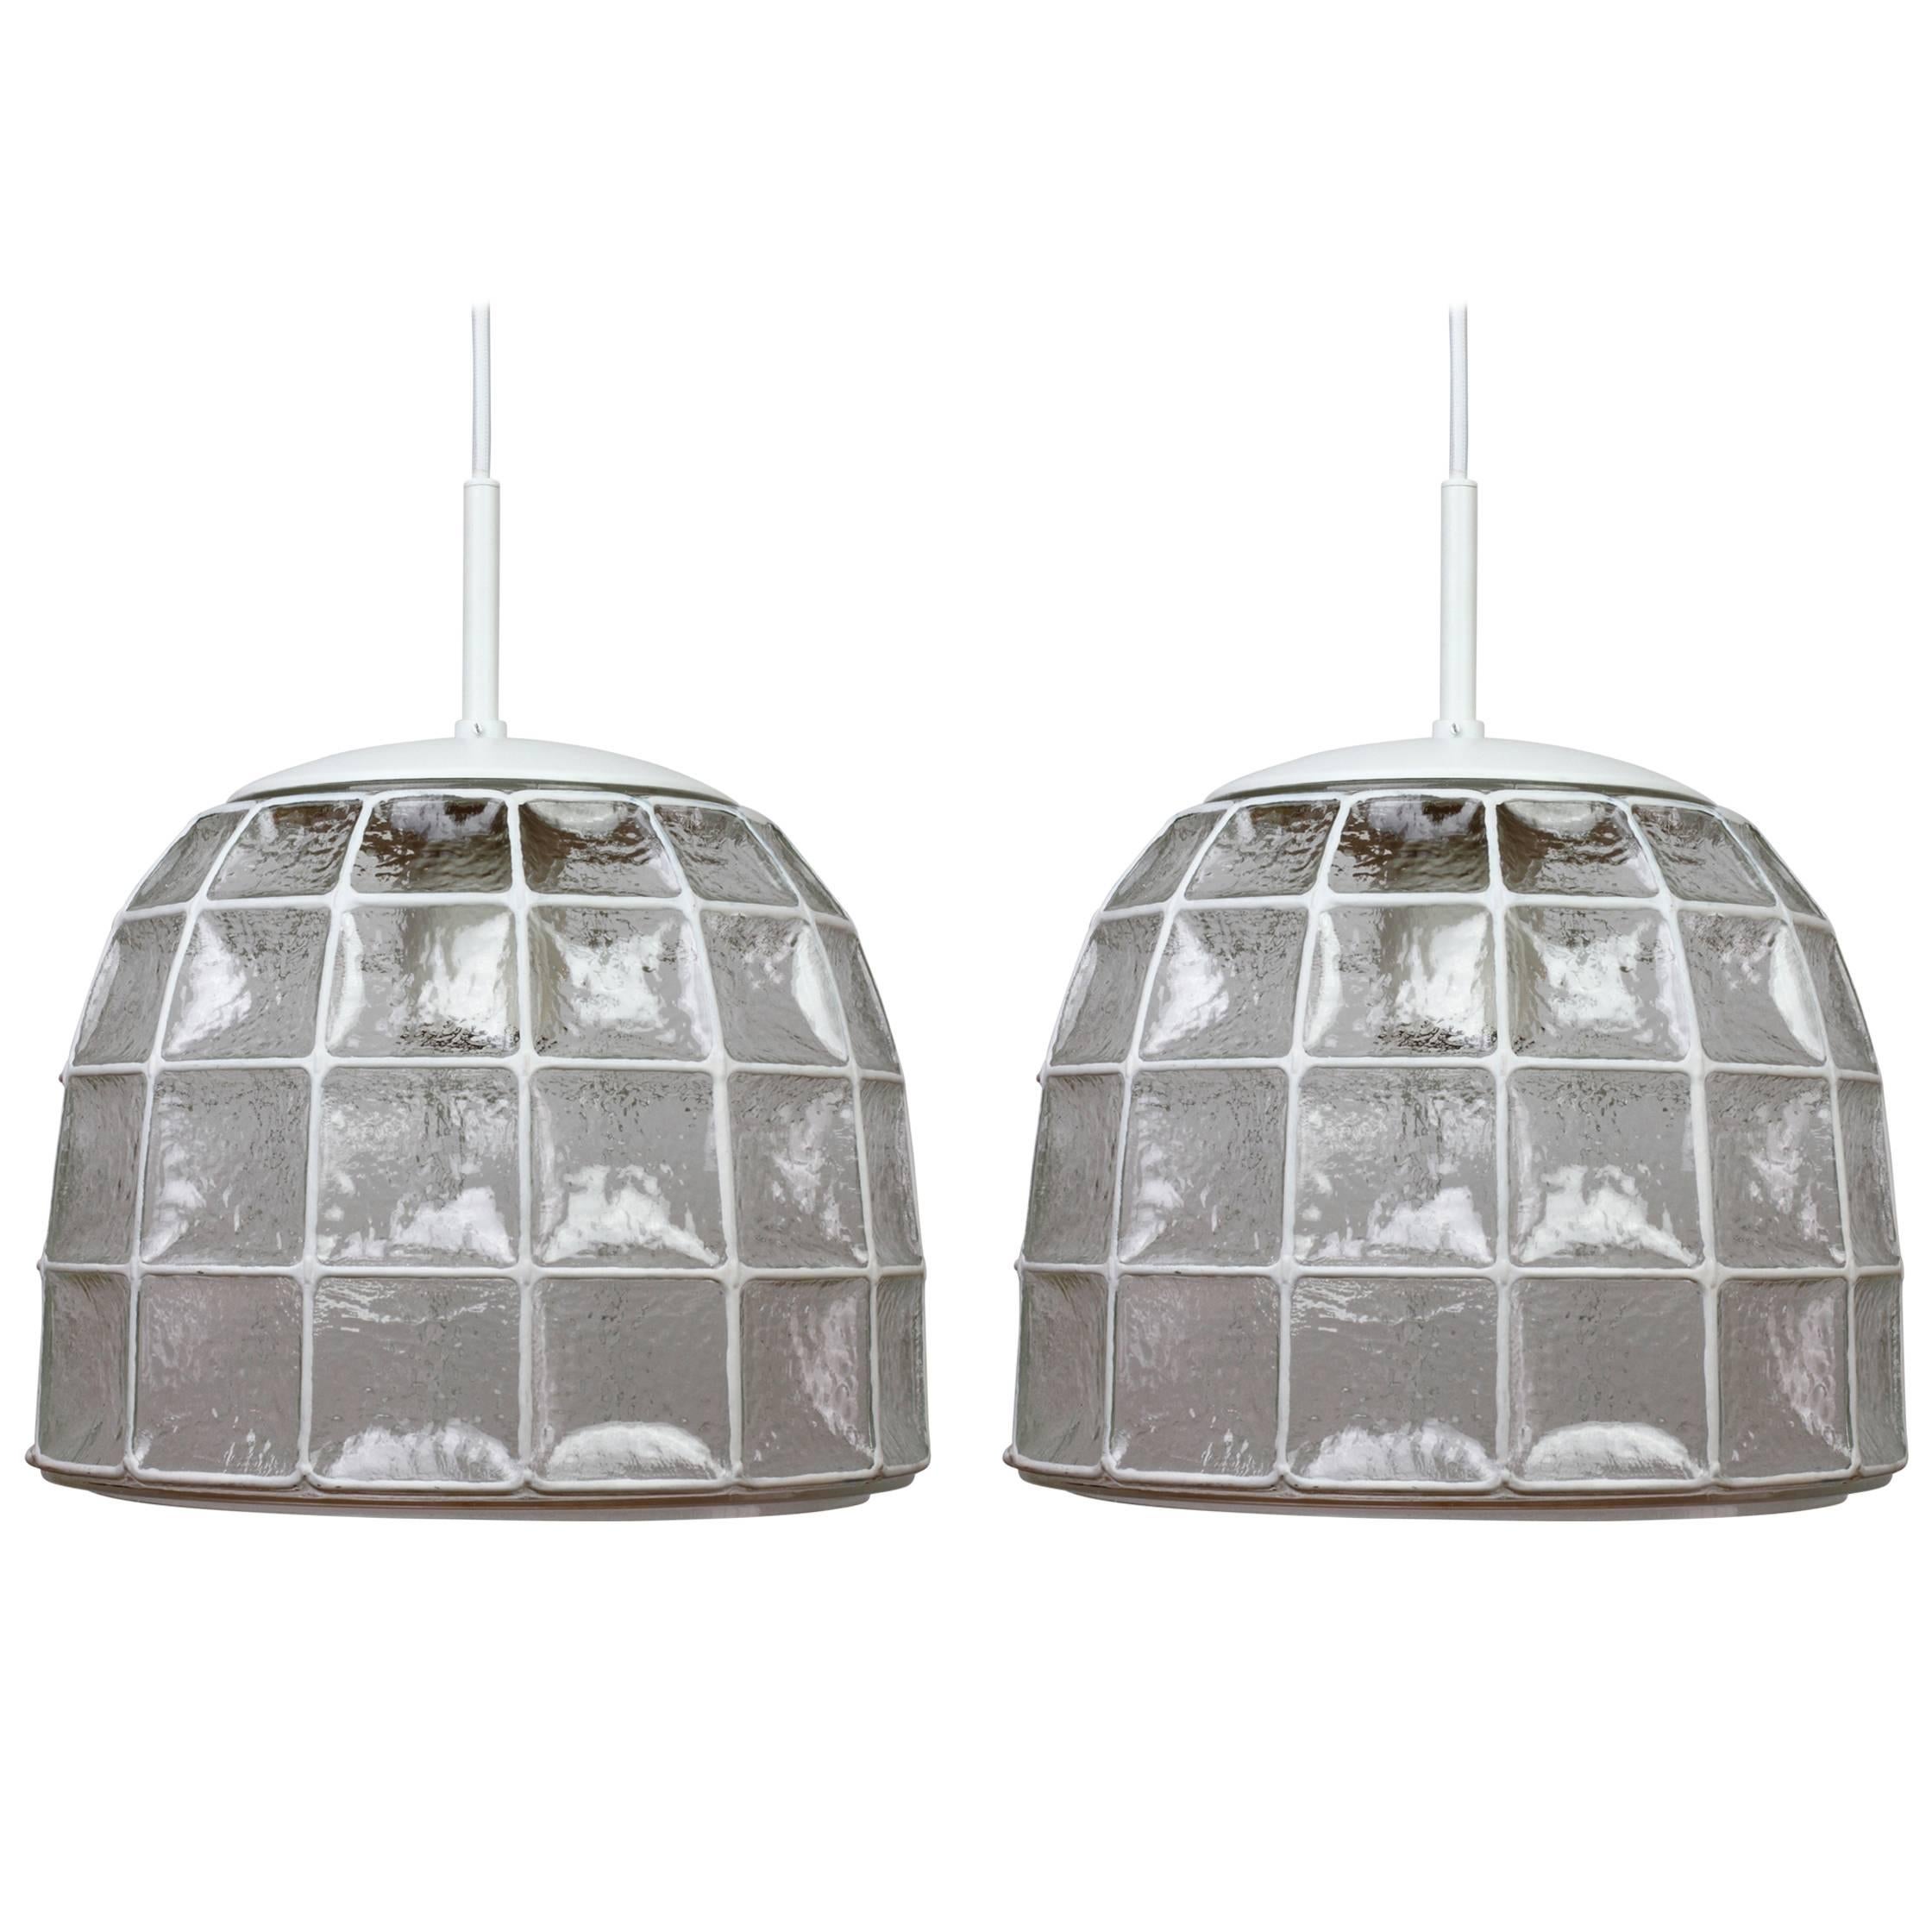 One of a Pair 1960s White Iron & Glass Honeycomb Bell Pendant Lights by Limburg